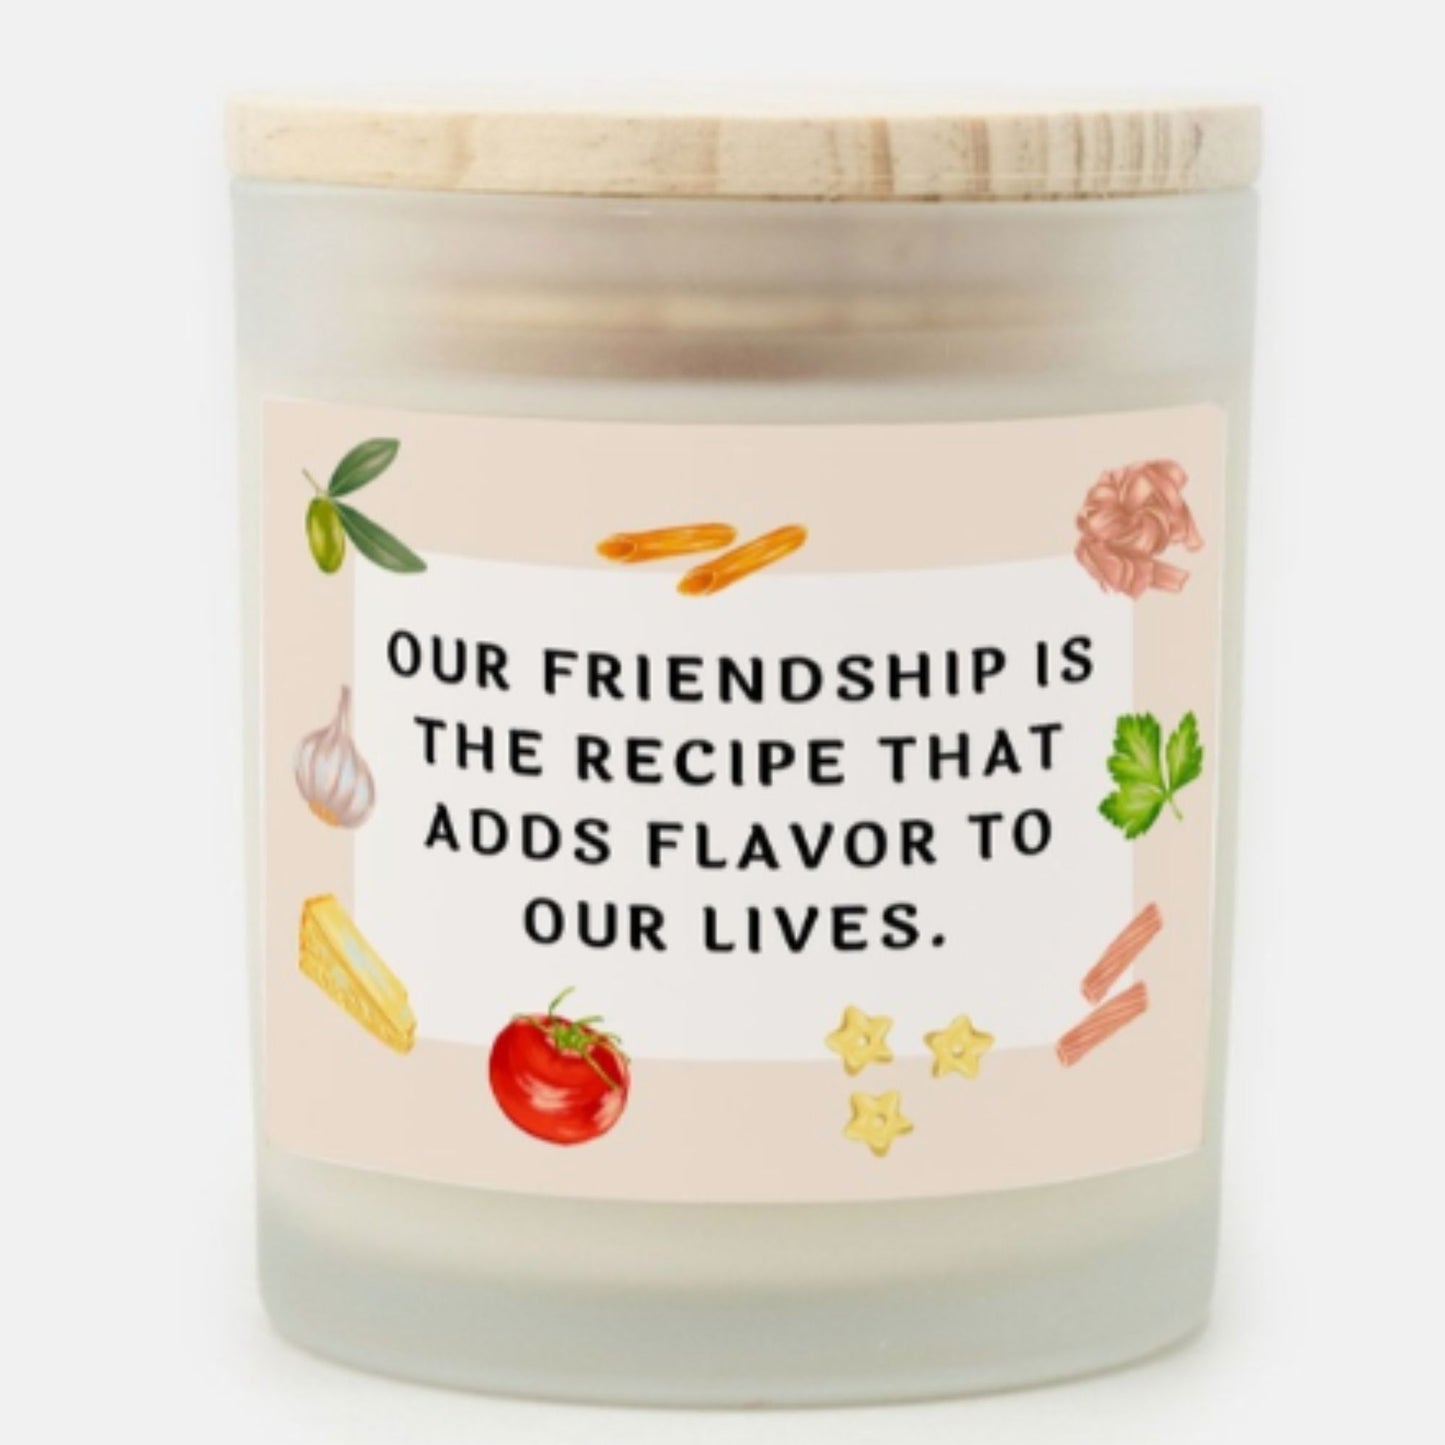 Our Friendship Candle Premium Non-Toxic Wood Wick Candle Frosted Glass (Hand Poured 11 oz)